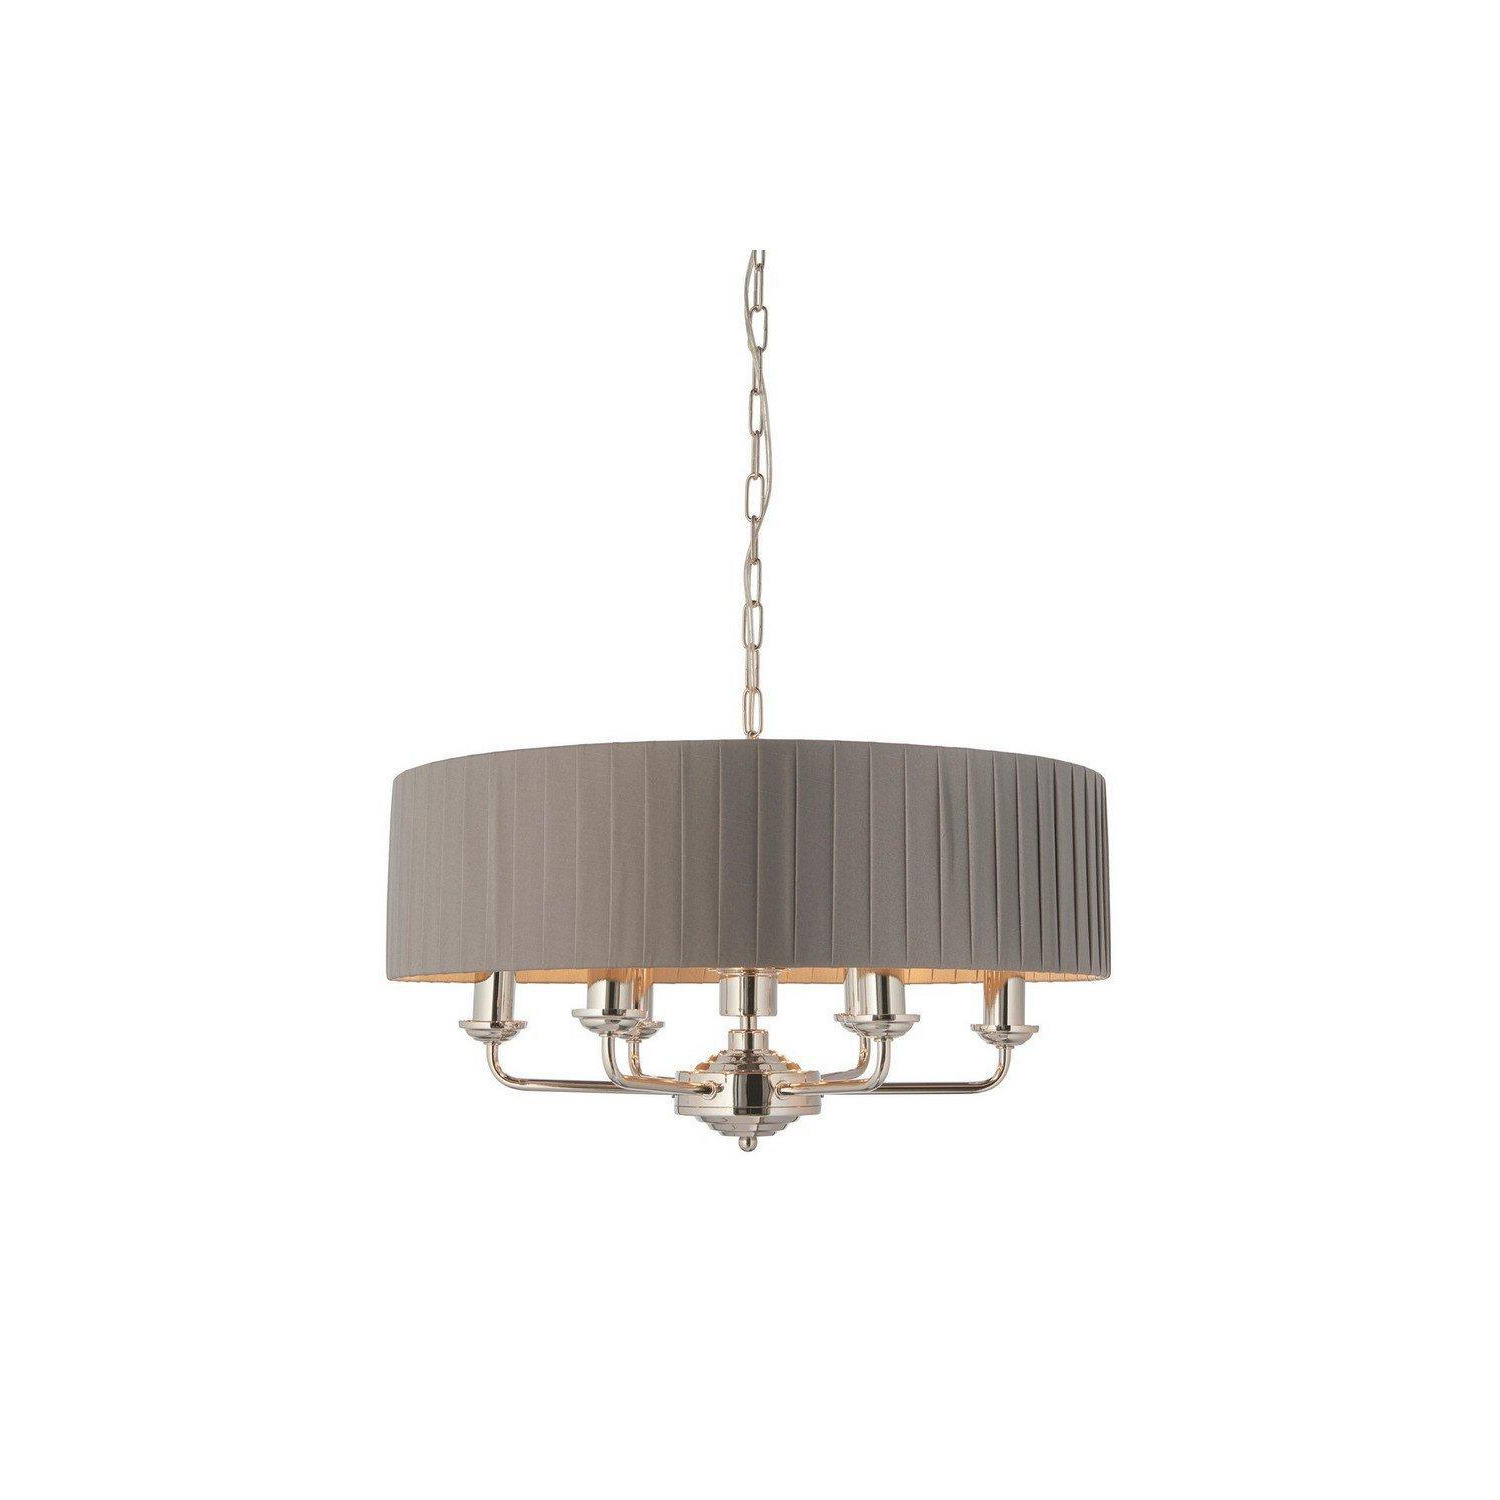 Highclere Single Shade Pendant Light Bright Nickel Plate Charcoal Fabric - image 1